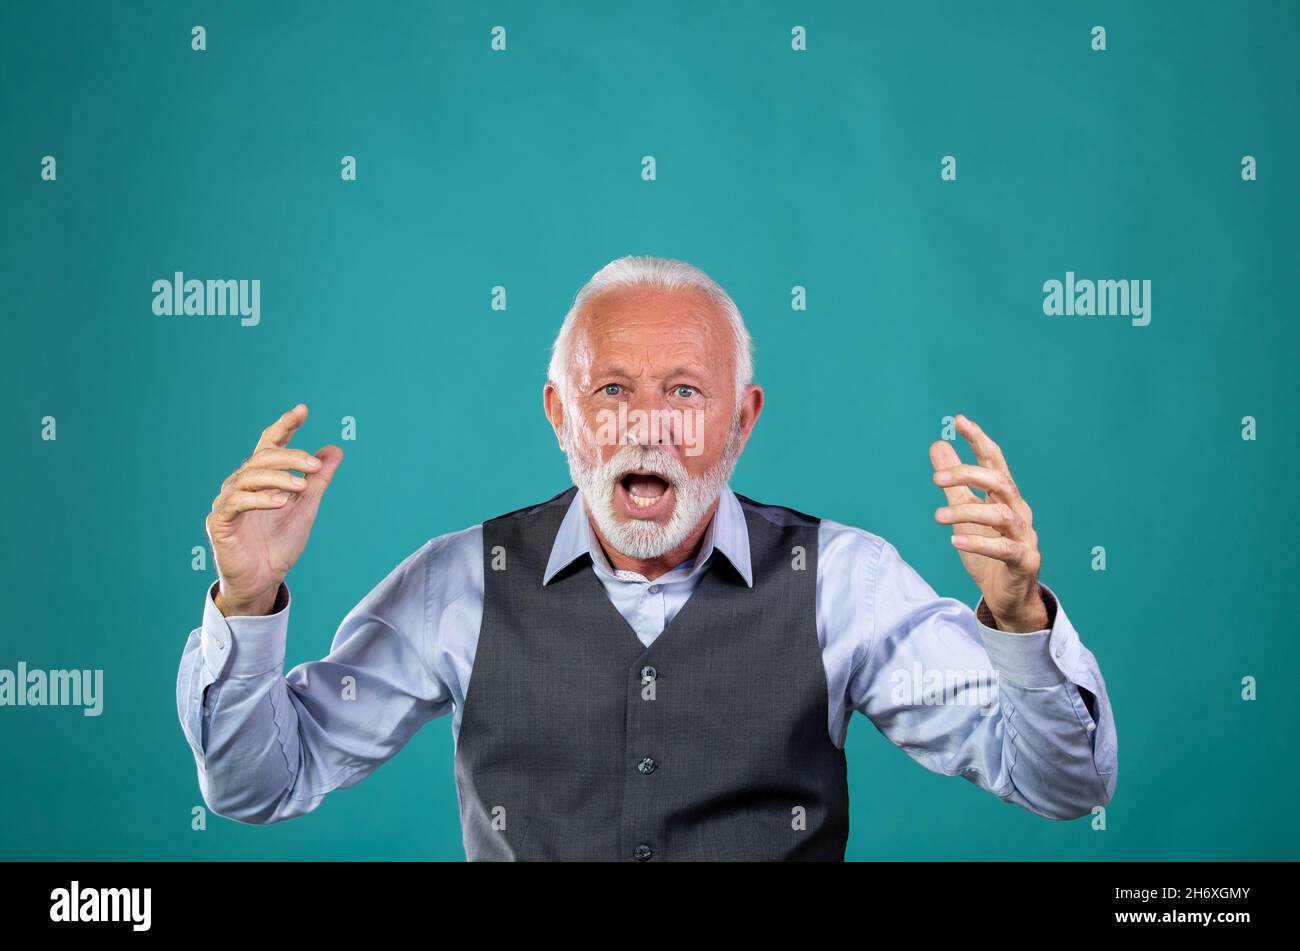 Portrait of old man in business suit yelling, feeling angry, frustrated. Surprised senior citizen with blue eyes and white hair and beard against colo Stock Photo